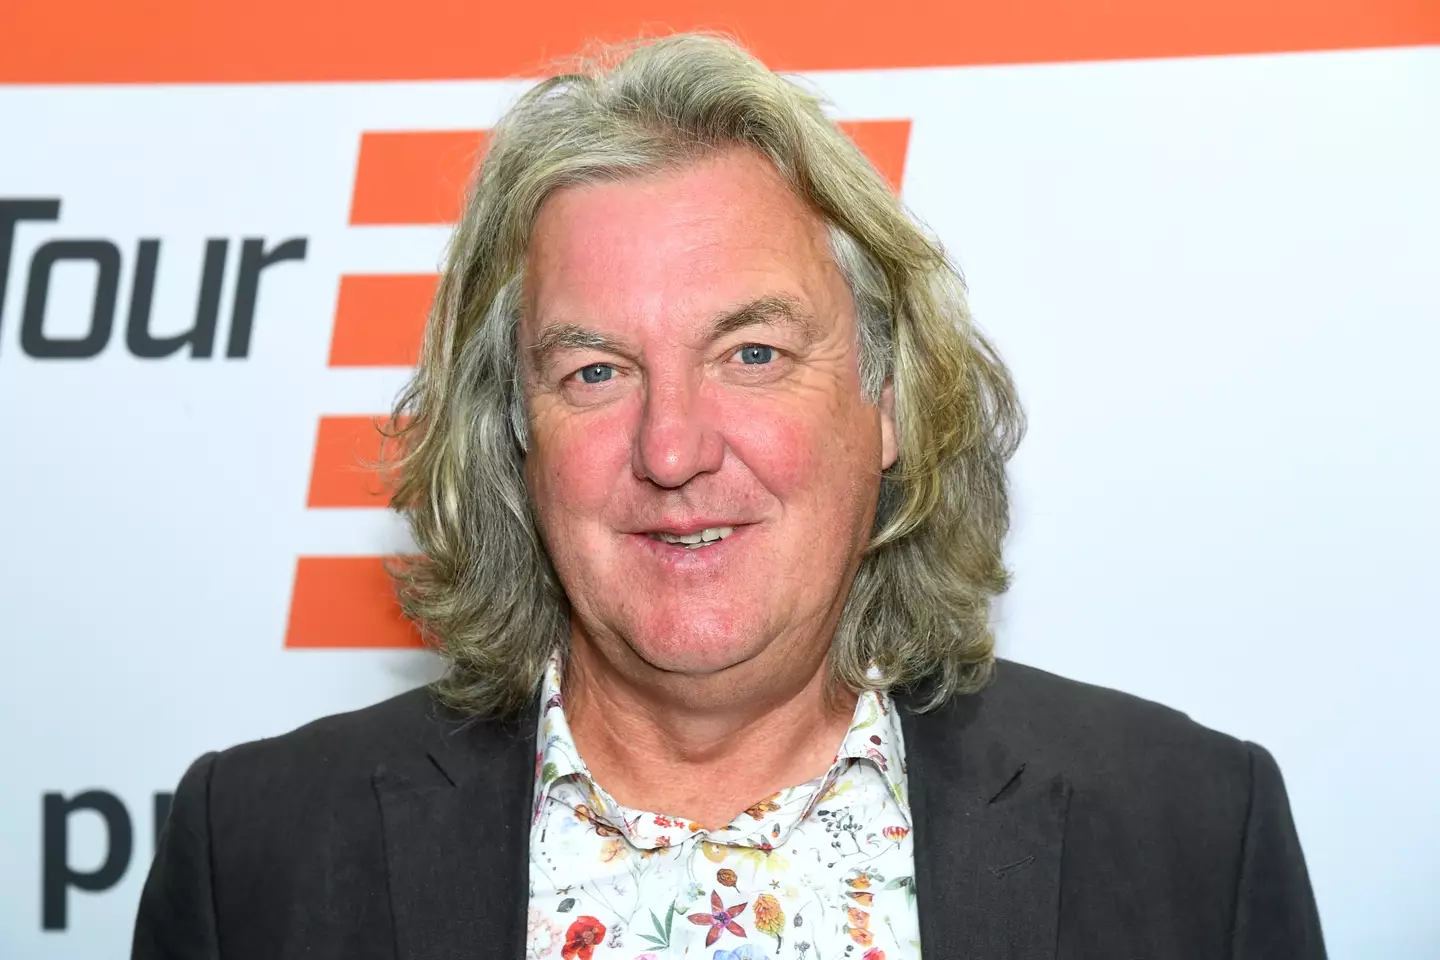 James May says he's been 'close to retirement' and is unlikely to work with Jeremy Clarkson and Richard Hammond again. (Dave J Hogan/Getty Images)